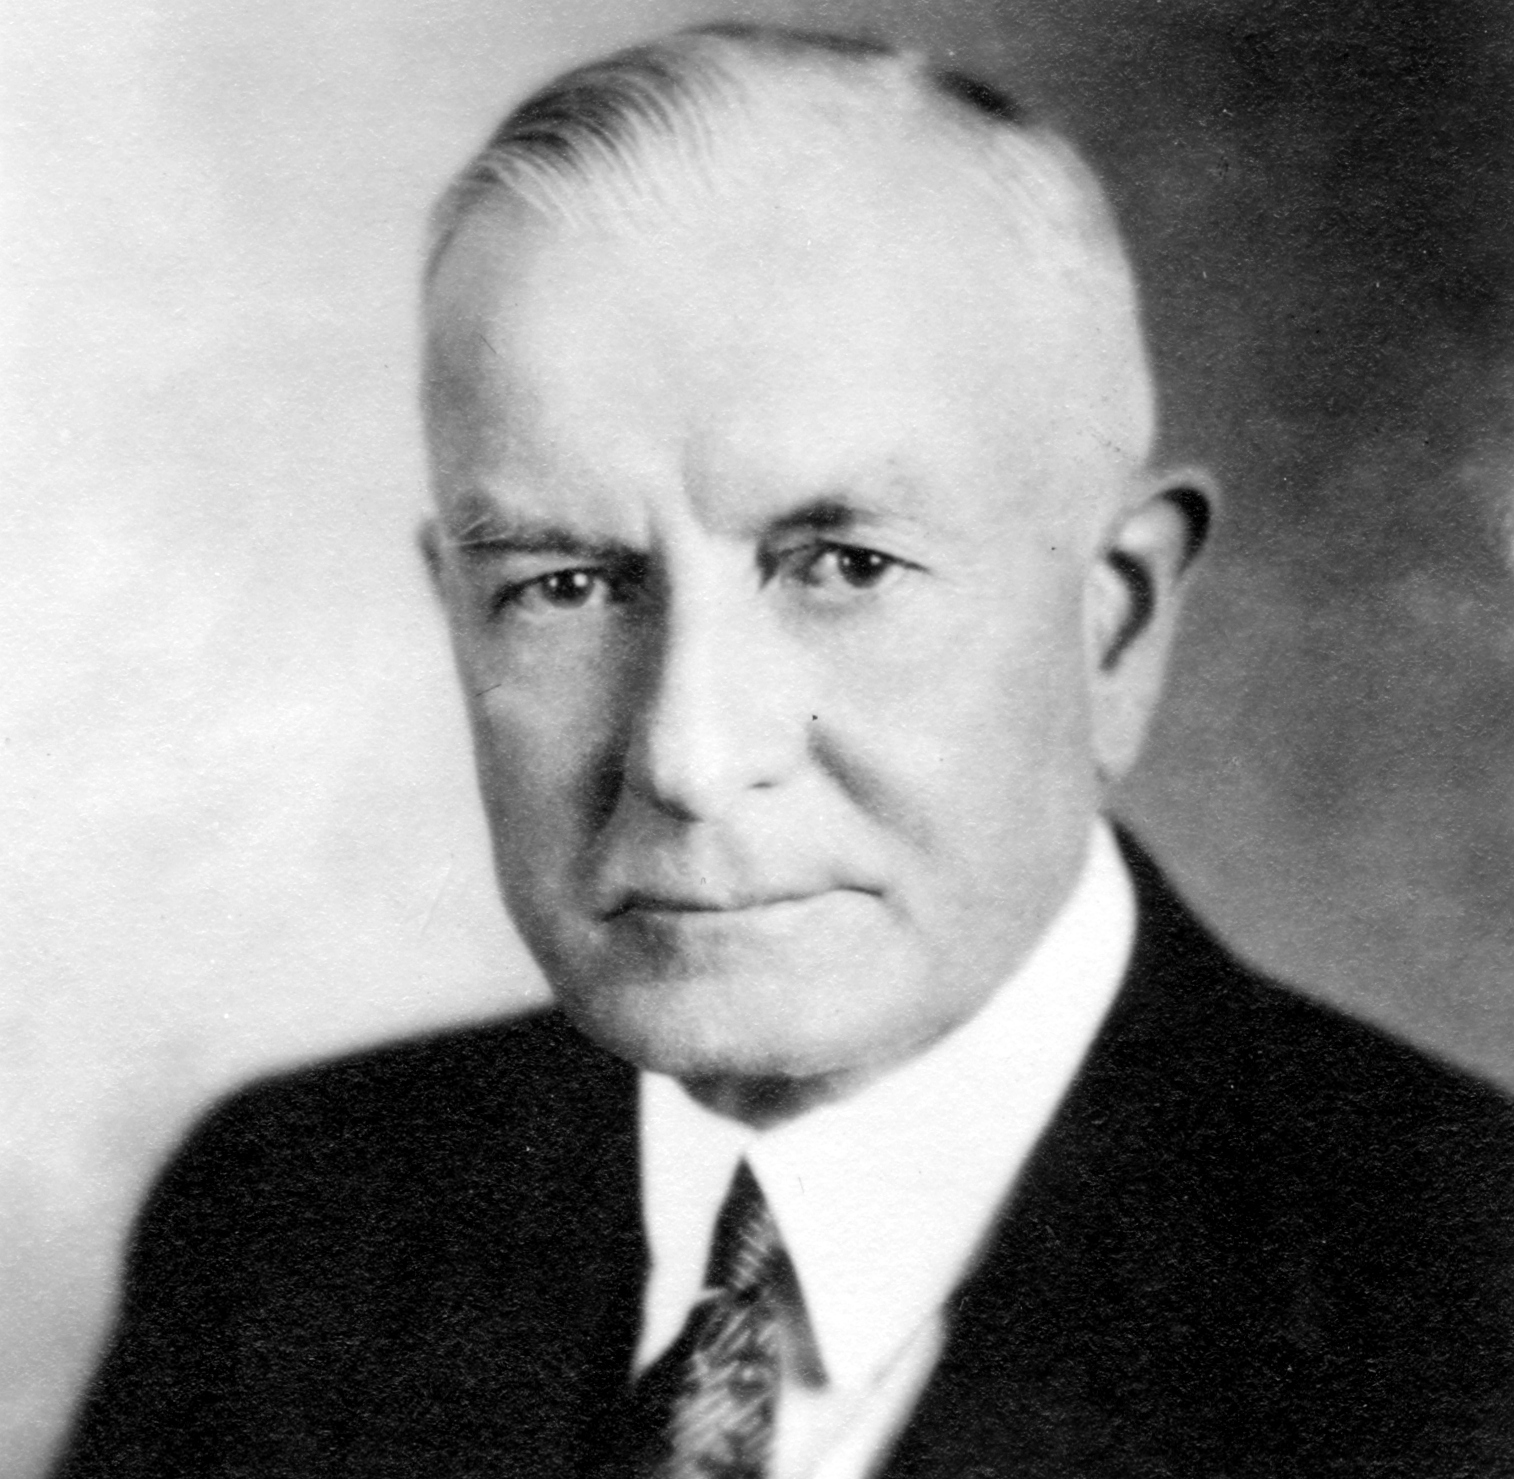 image of IBM President Thomas J. Watson, @1920s, from IBM Corporate Archives